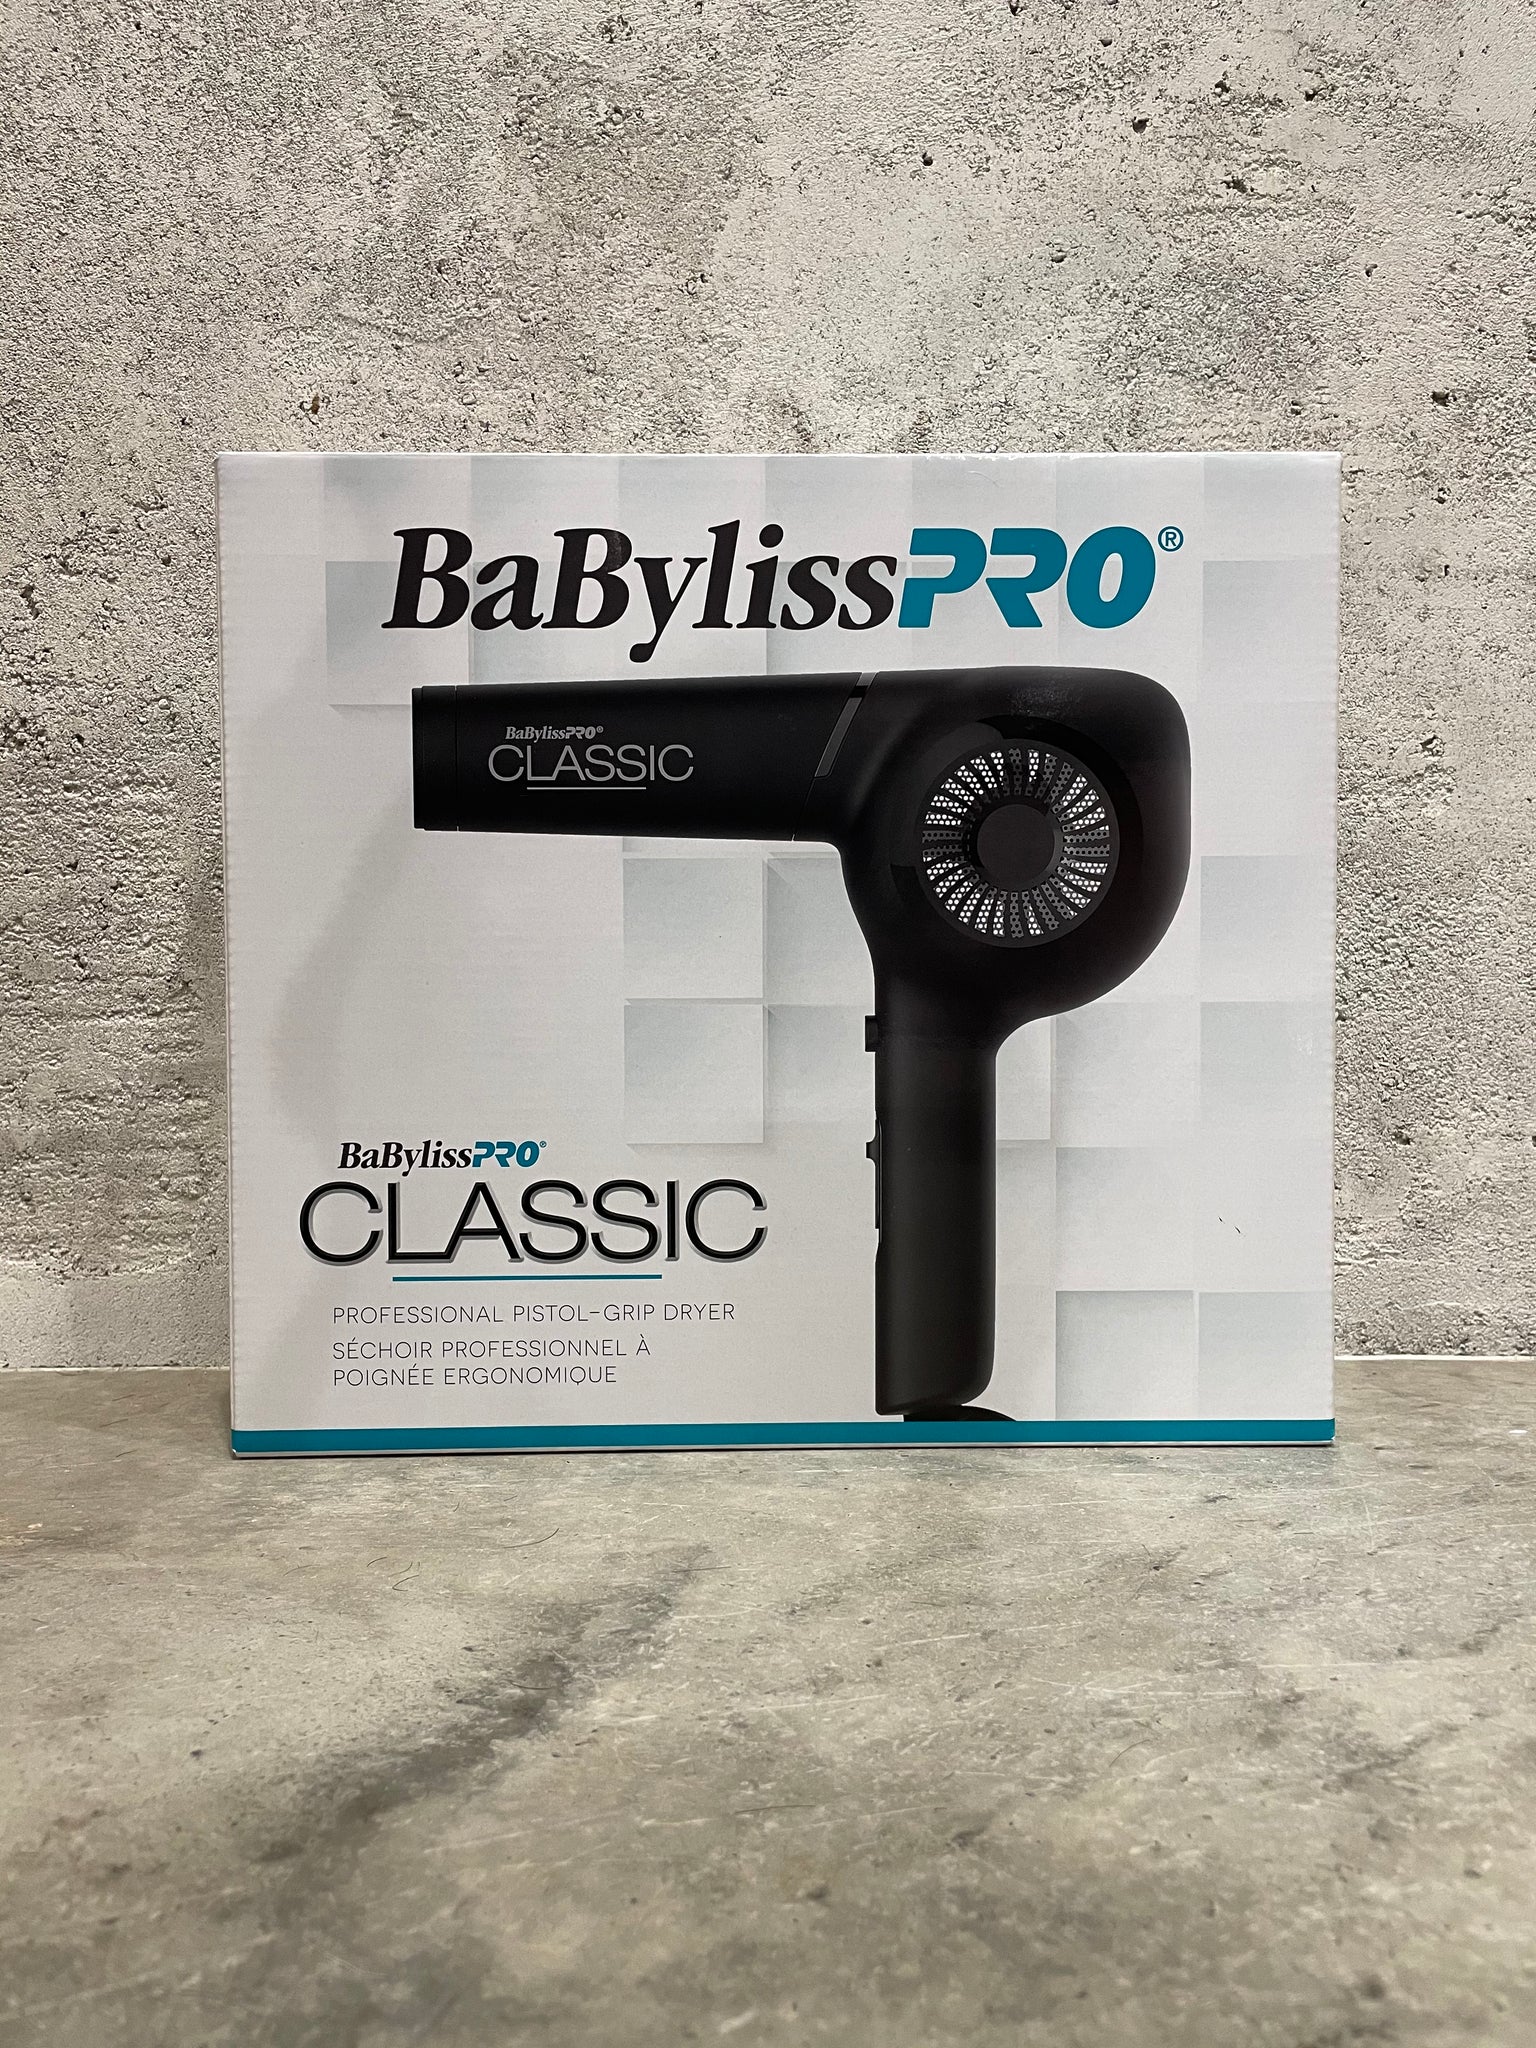 Baby bliss classic blow dryer